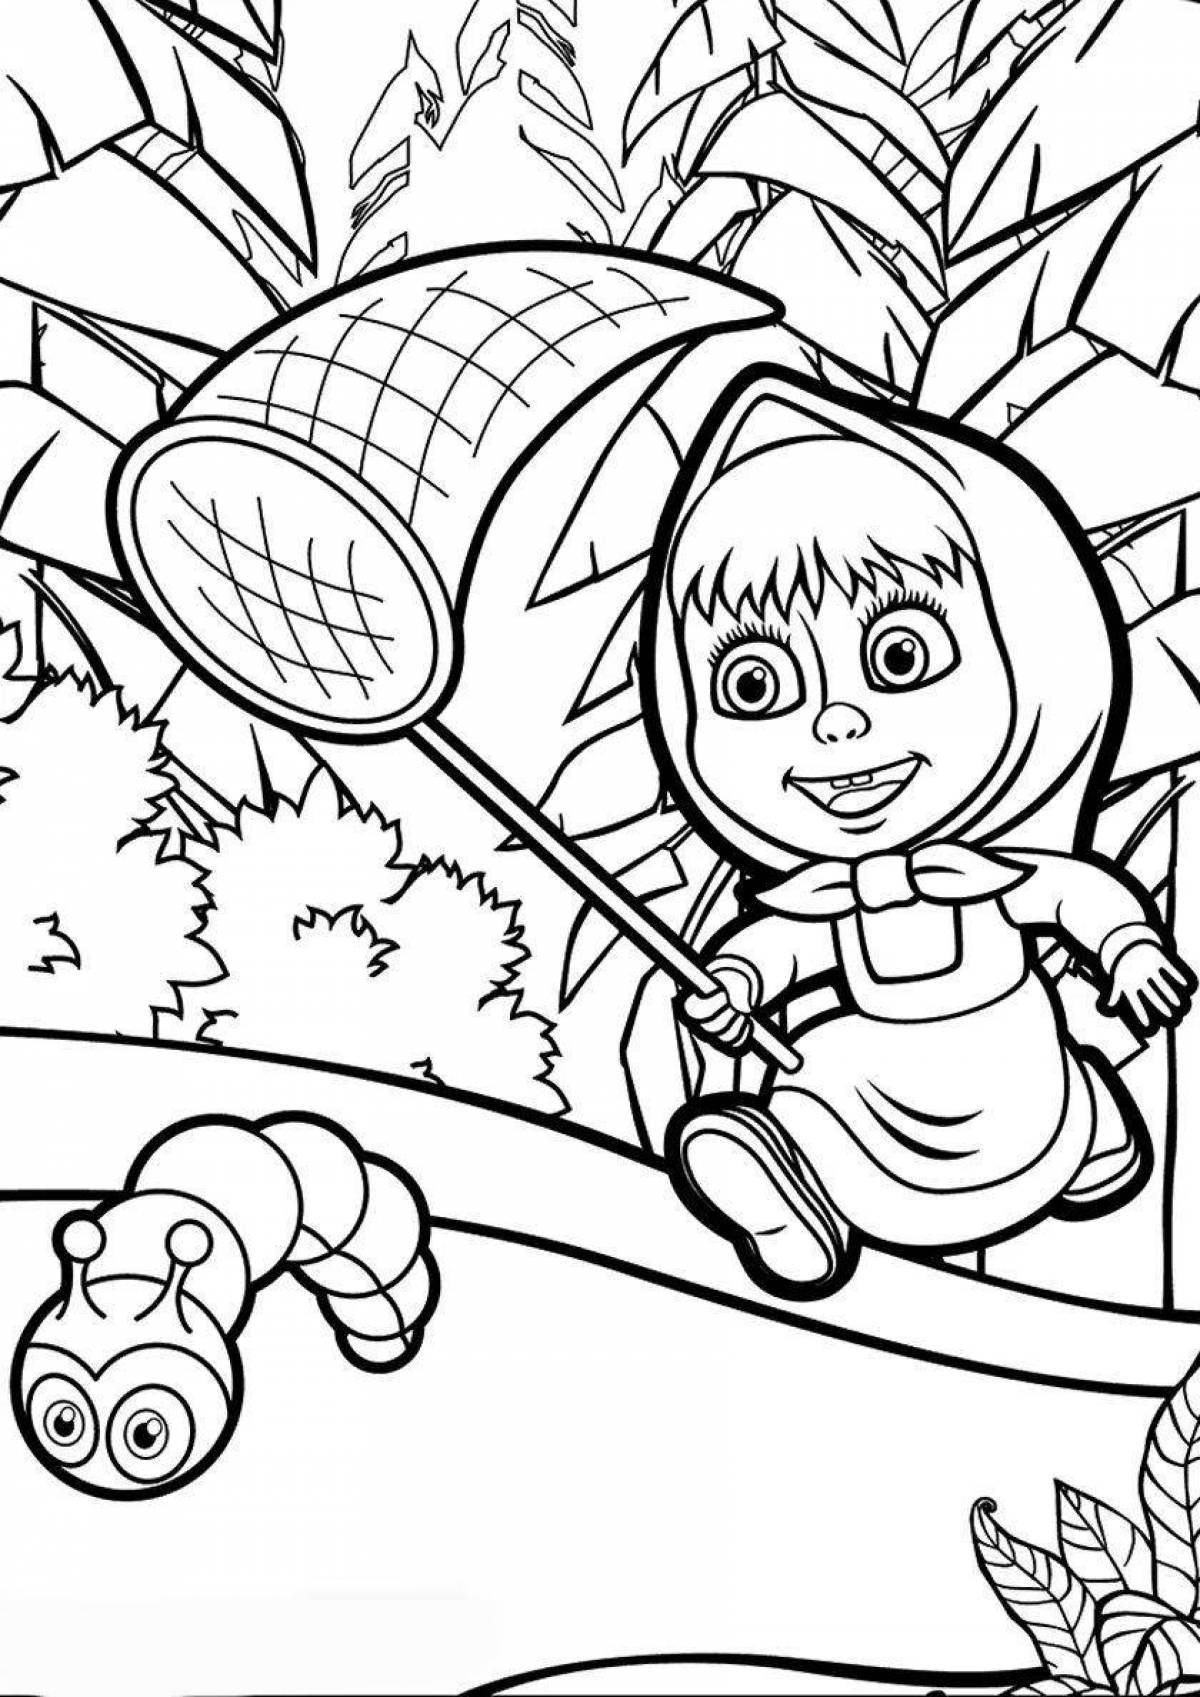 Delightful Masha and the bear super coloring